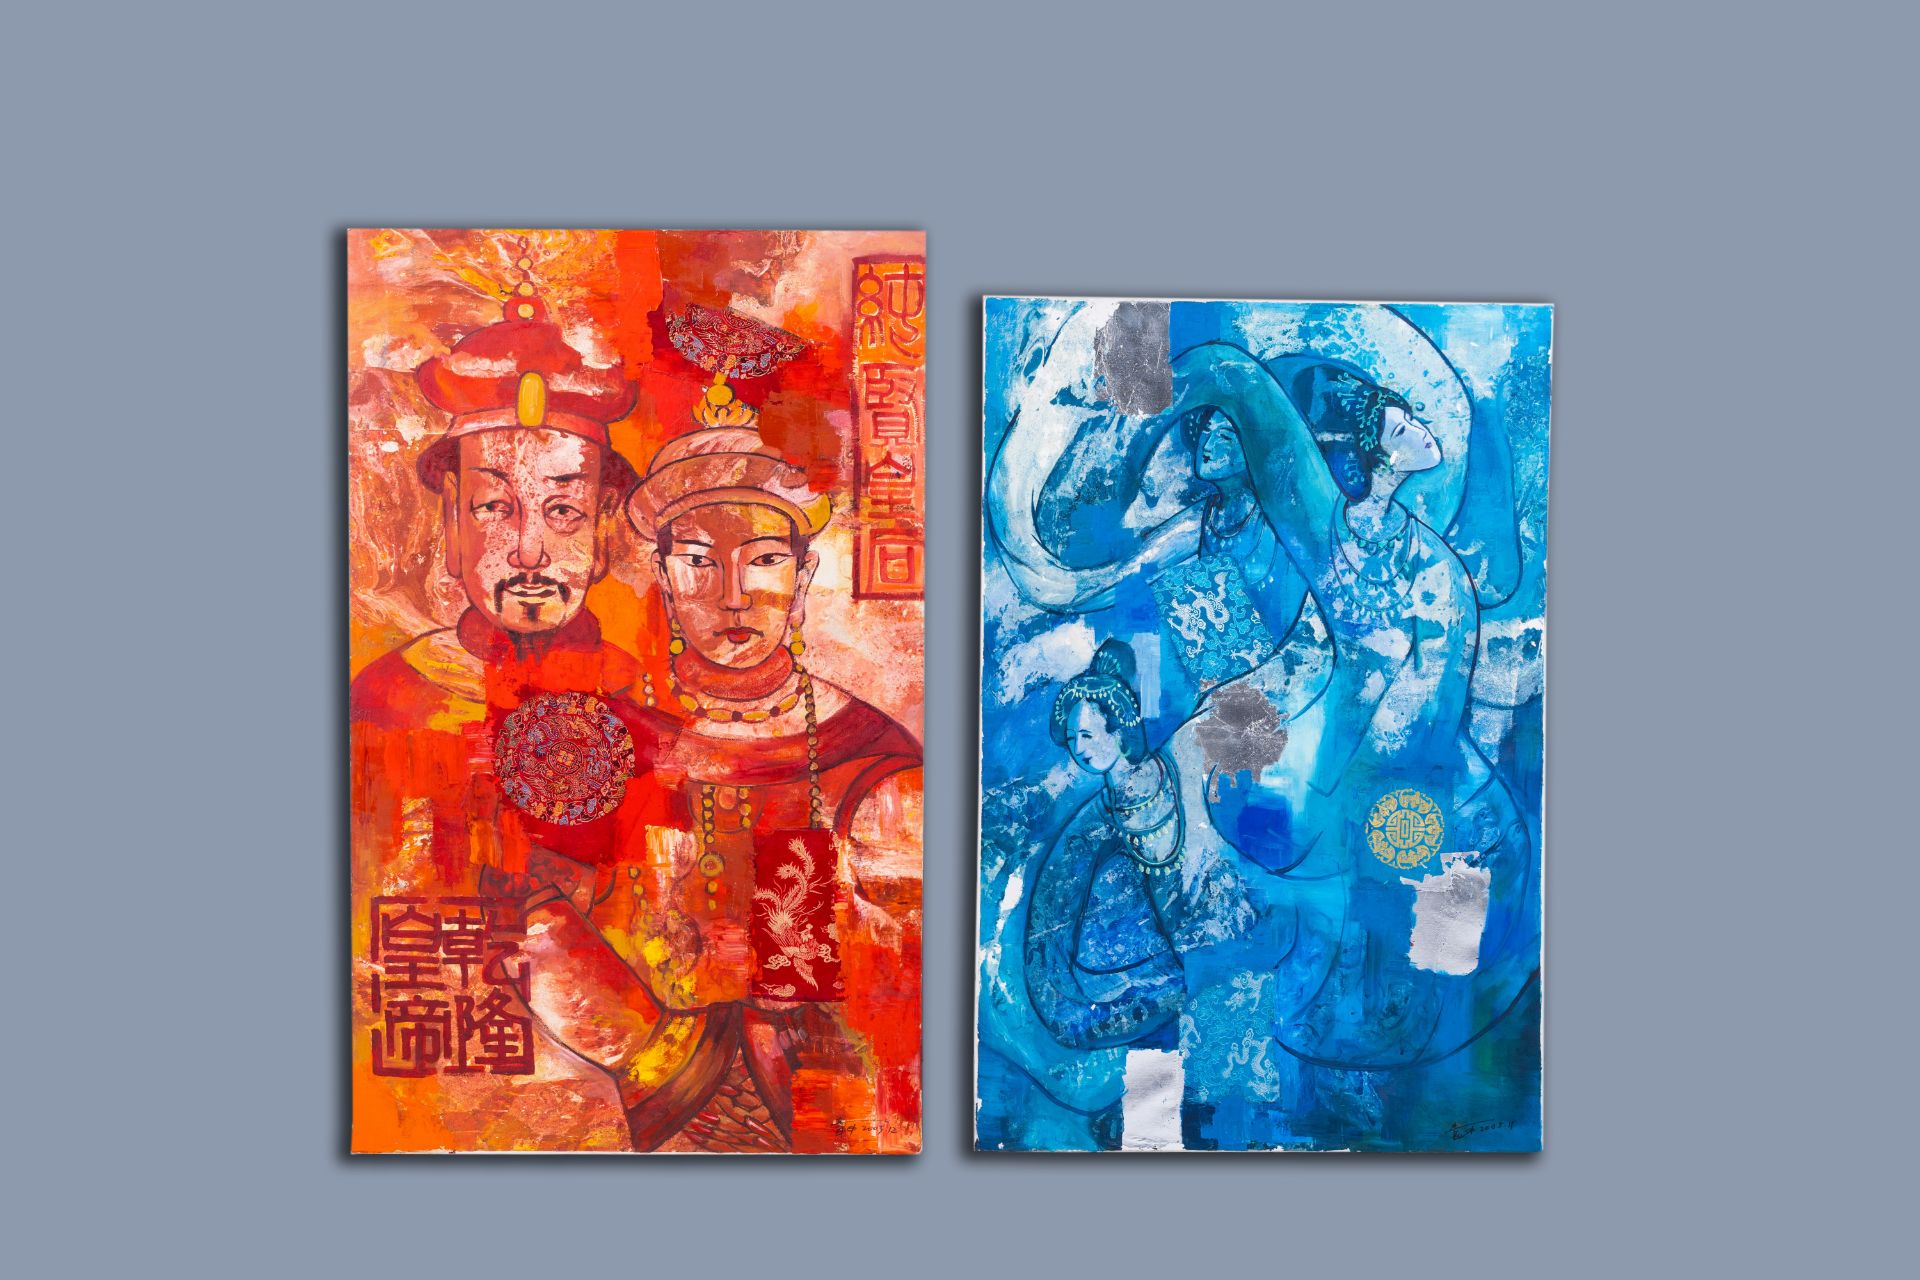 Wei Shen (1966): 'Emperor and Empress' and Dancing ladies, mixed media, dated 2005